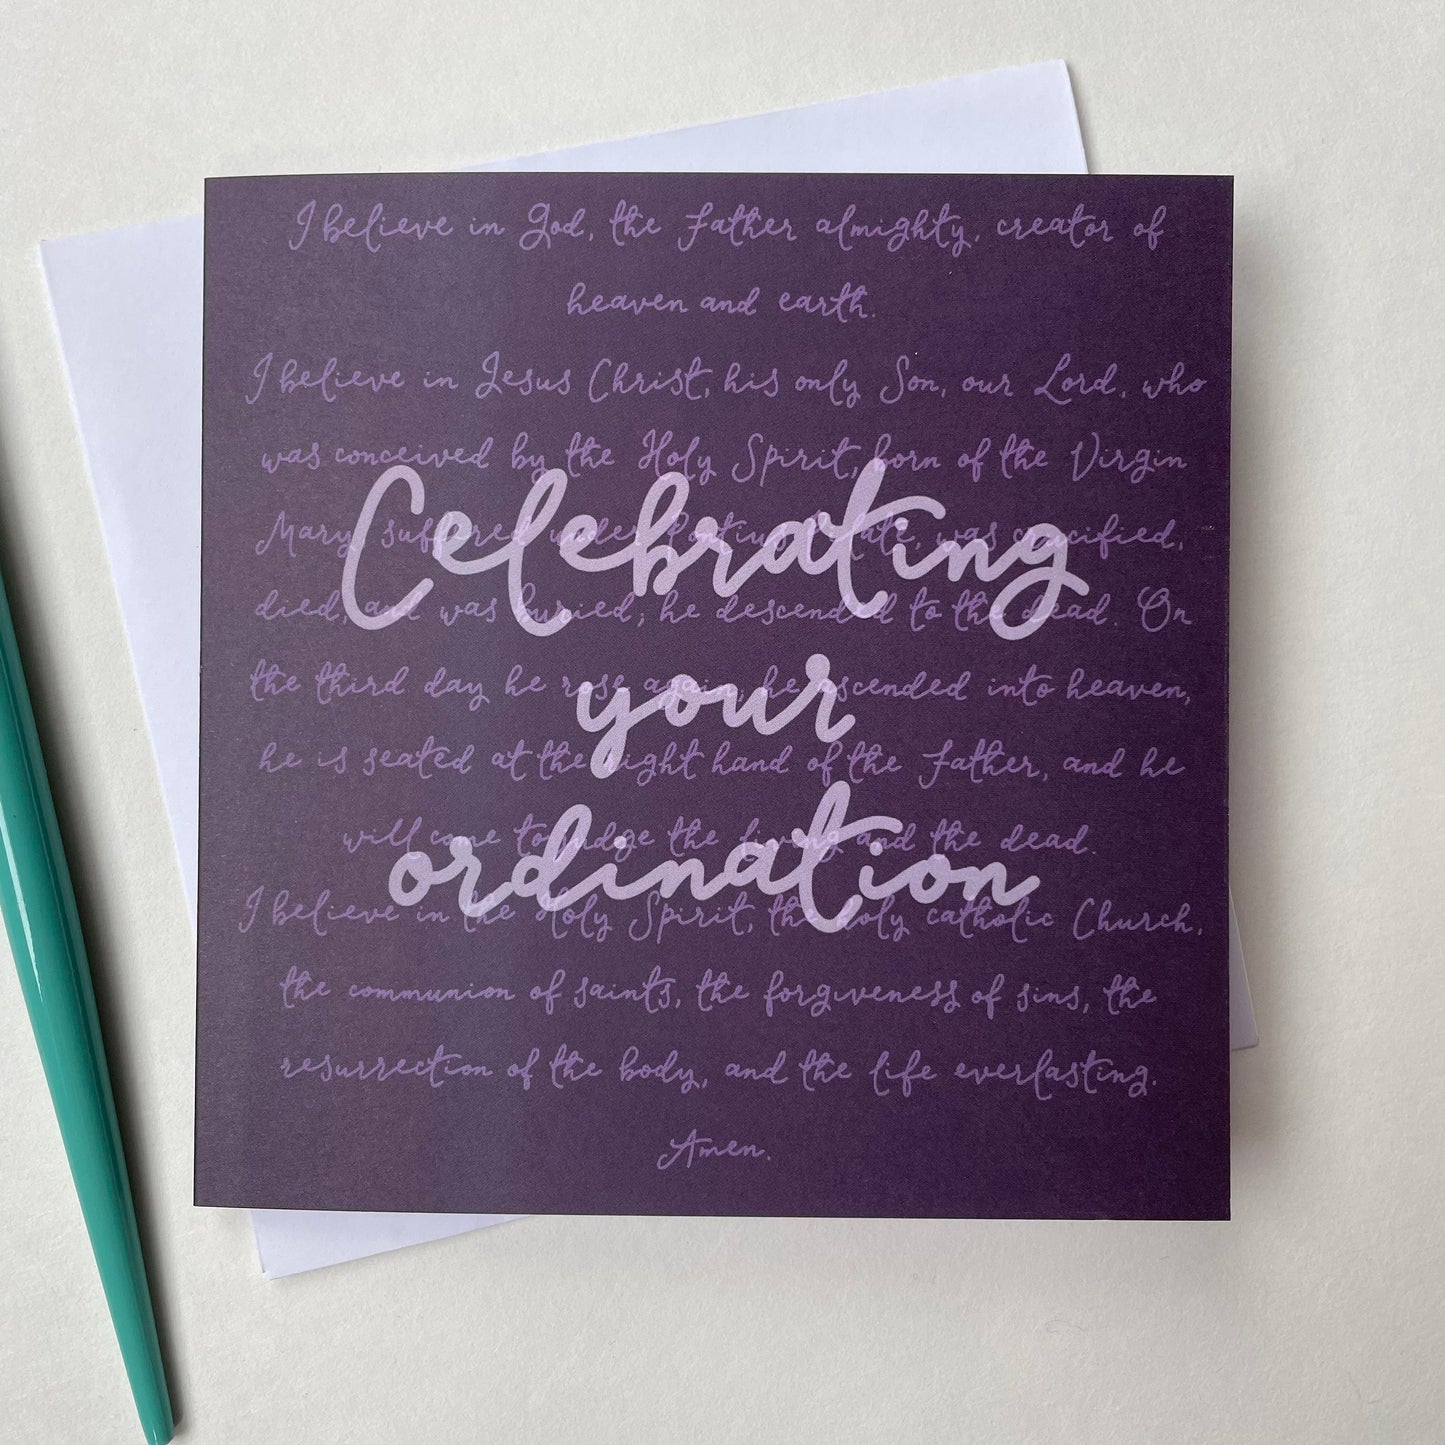 Ordination card - celebrating your ordination - apostles creed Greeting & Note Cards And Hope Designs   